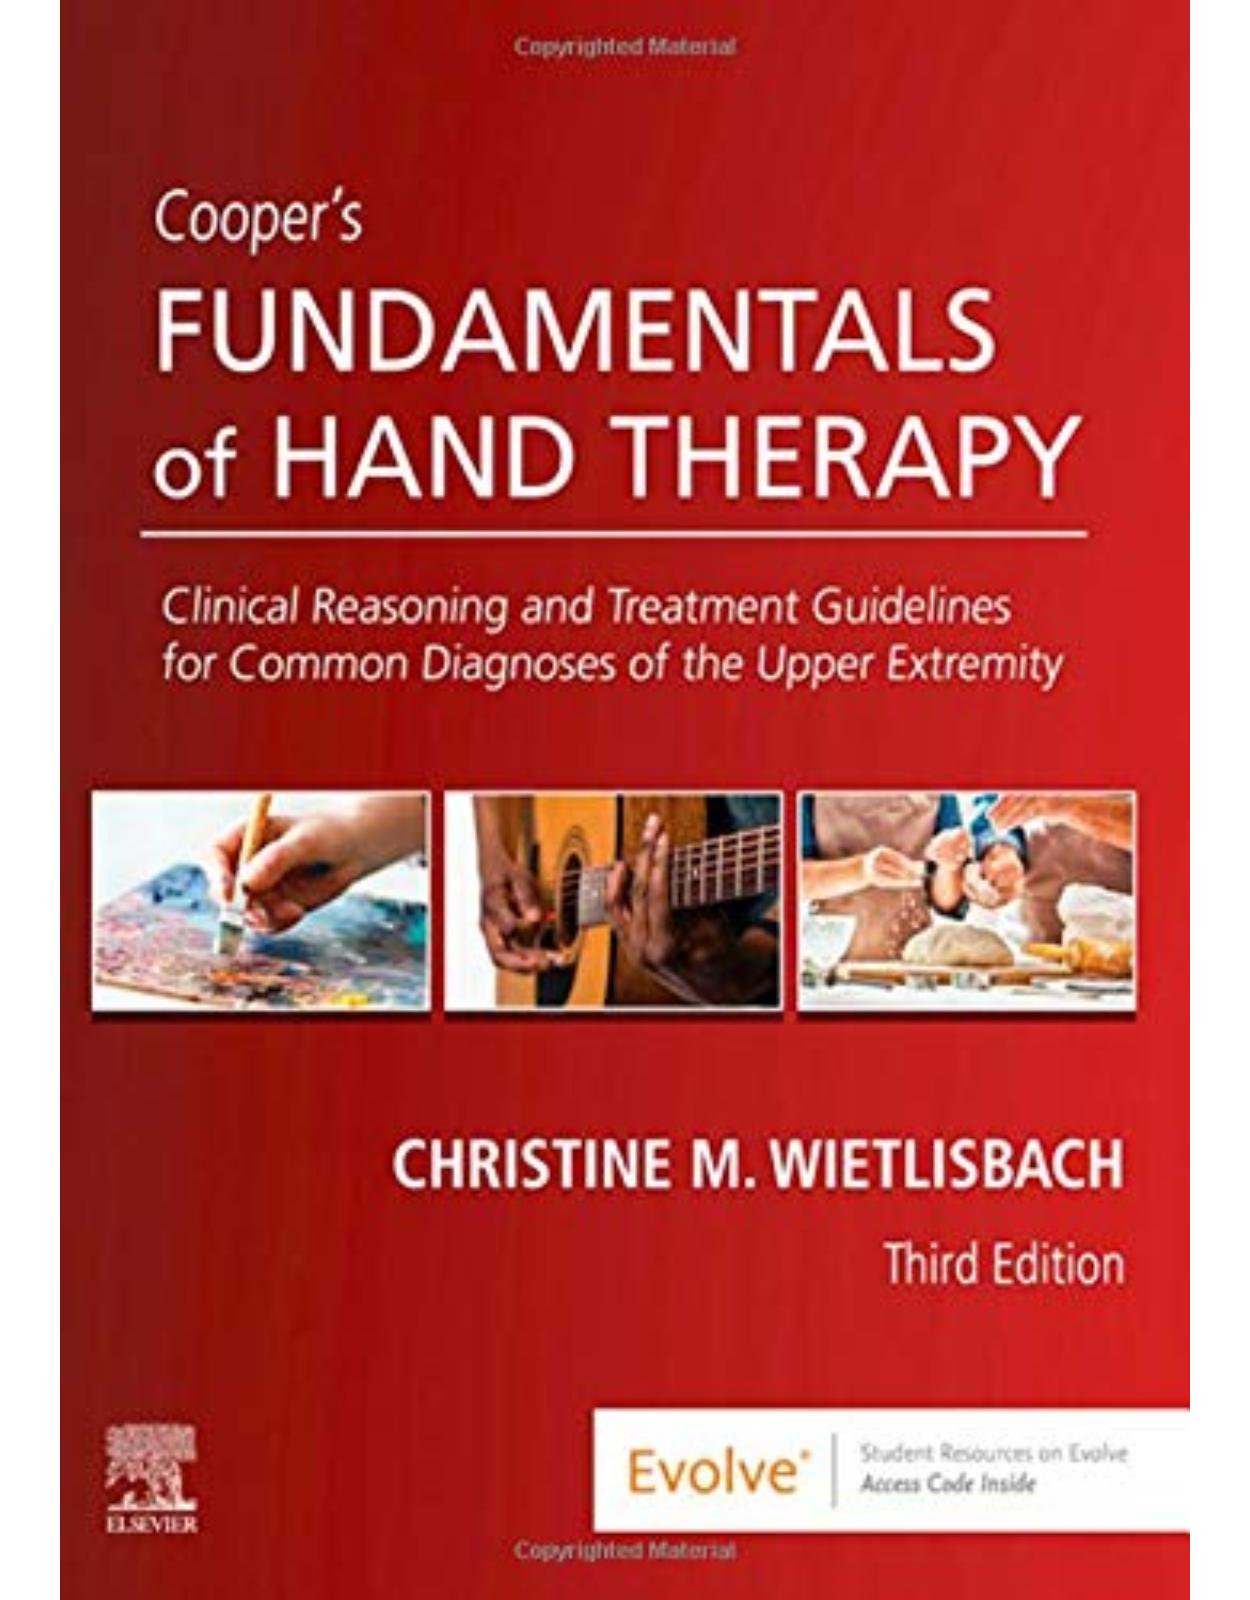 Cooper's Fundamentals of Hand Therapy, Clinical Reasoning and Treatment Guidelines for Common Diagnoses of the Upper Extremity, 3rd Edition